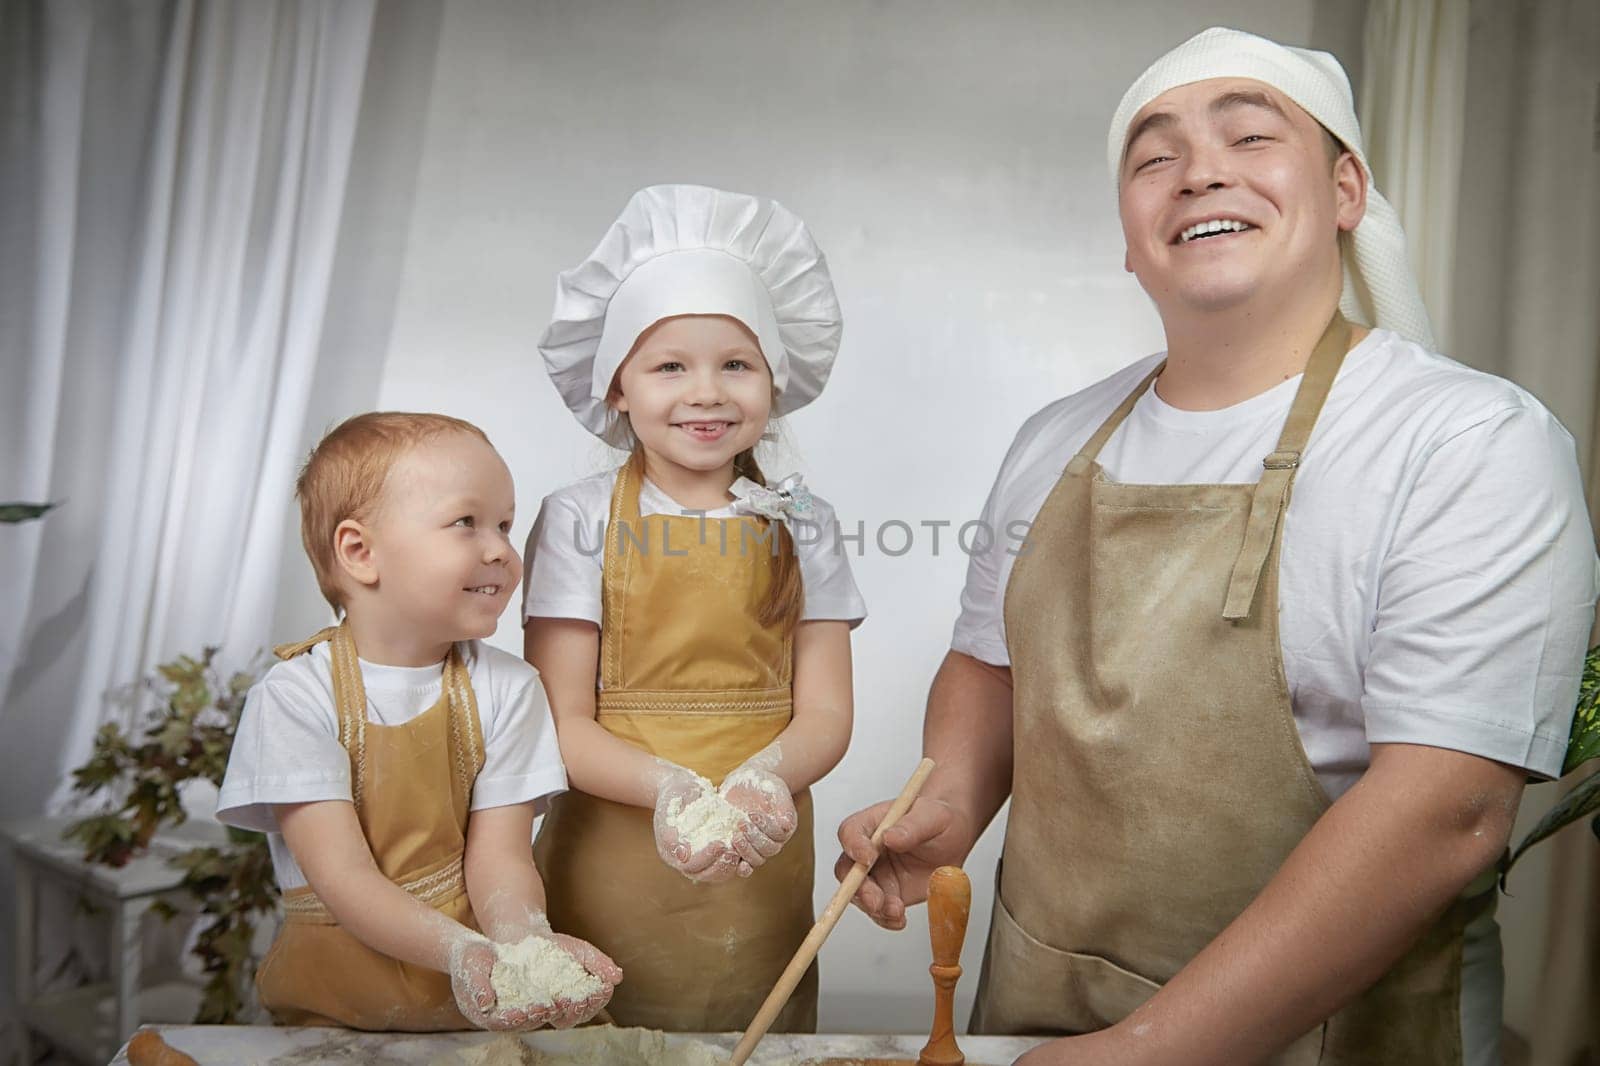 Cute oriental family with father, daughter, son cooking in the kitchen on Ramadan, Kurban-Bairam. Funny family at a cook photo shoot. Easter